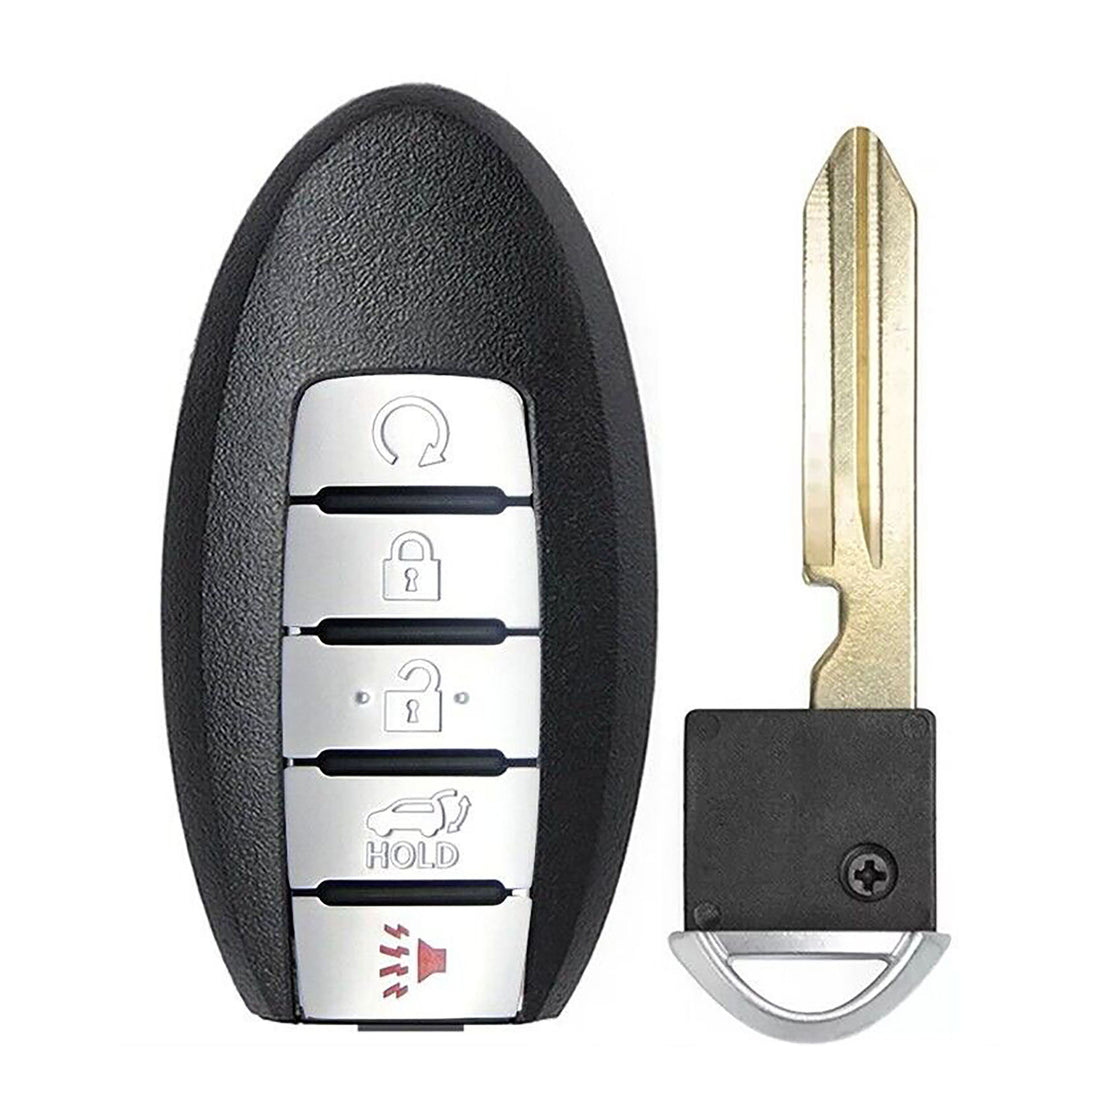 1x New Replacement Proximity Key Fob Compatible with & Fit For Nissan Infiniti Read Description - MPN S180144308-02